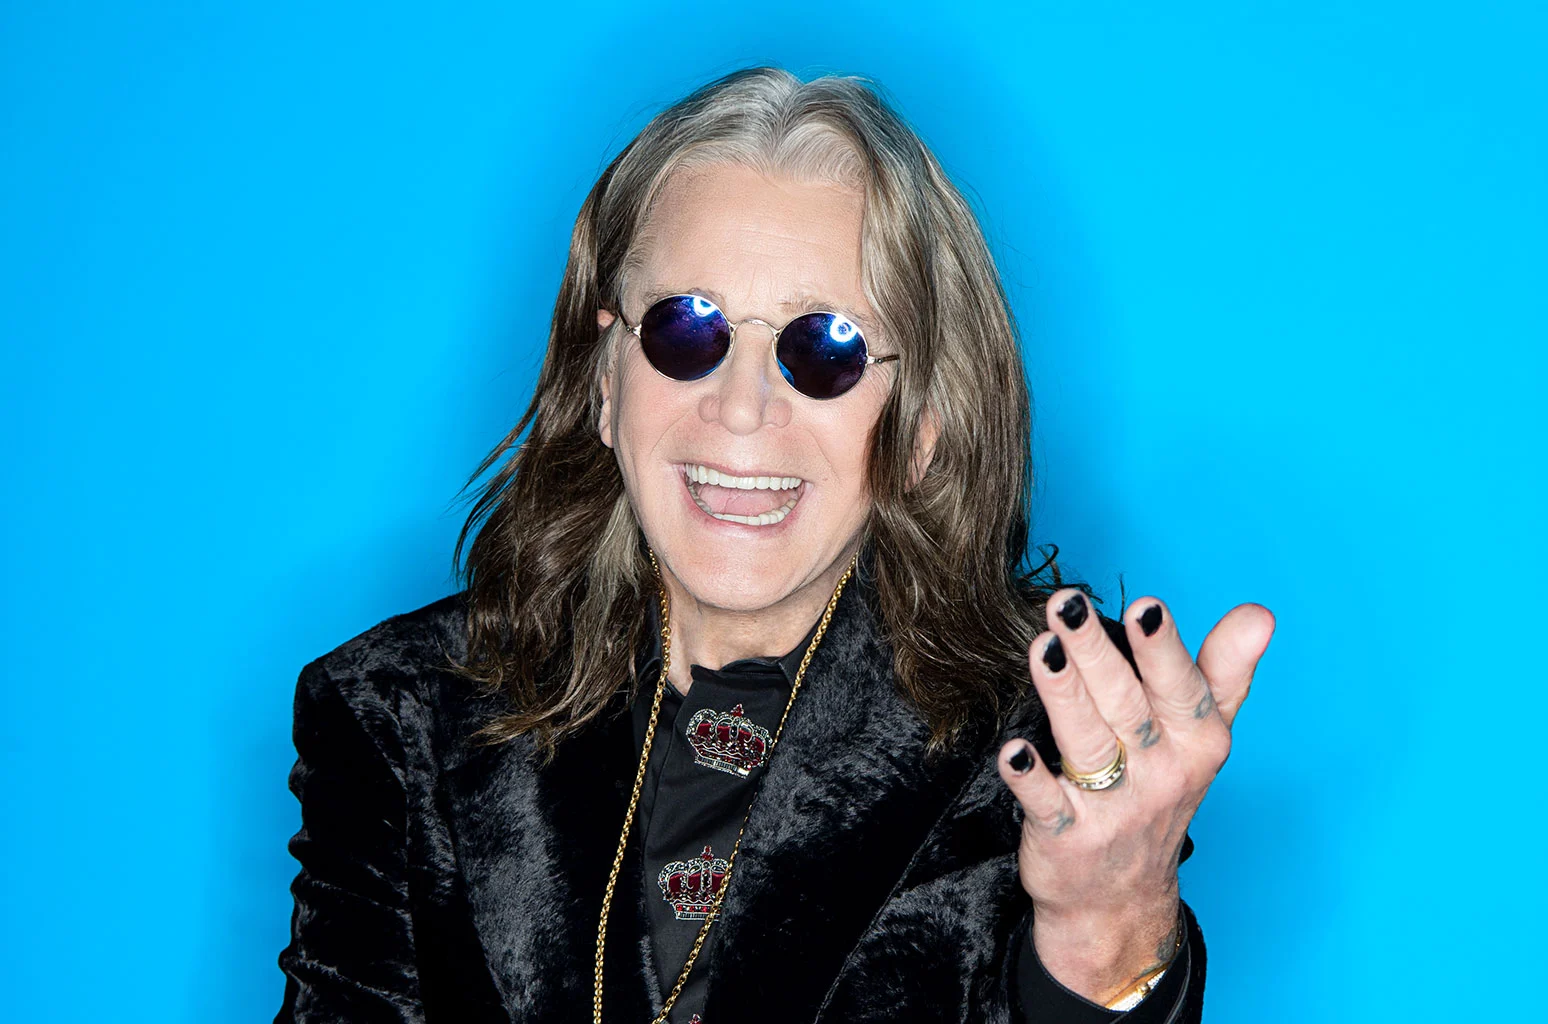 Ozzy Osbourne Biography, Age, Net Worth, Wife, Children, Siblings, Parents